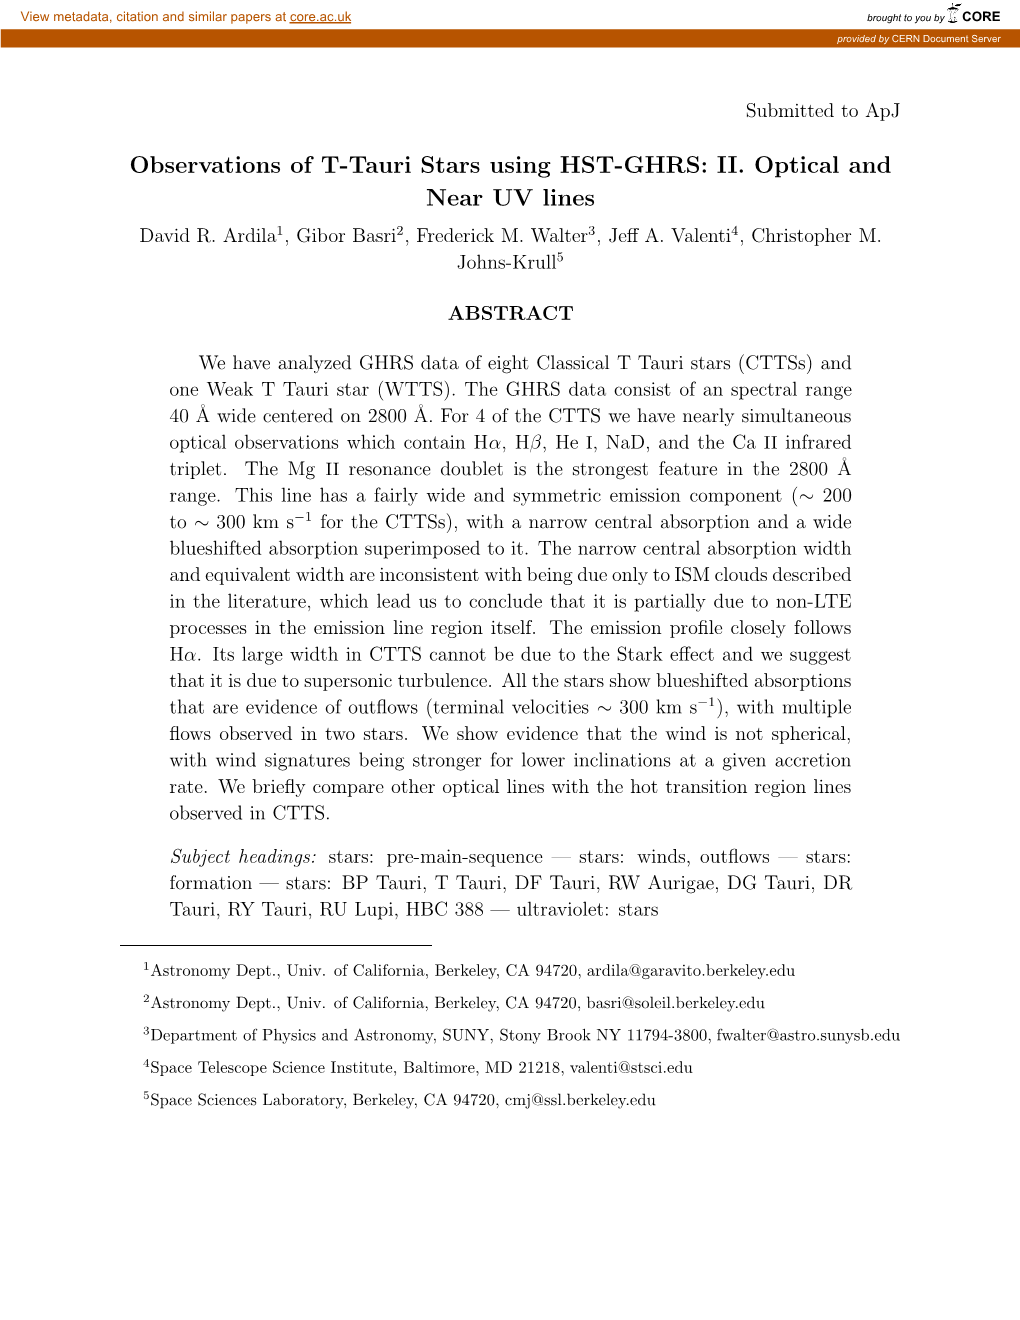 Observations of T-Tauri Stars Using HST-GHRS: II. Optical and Near UV Lines David R